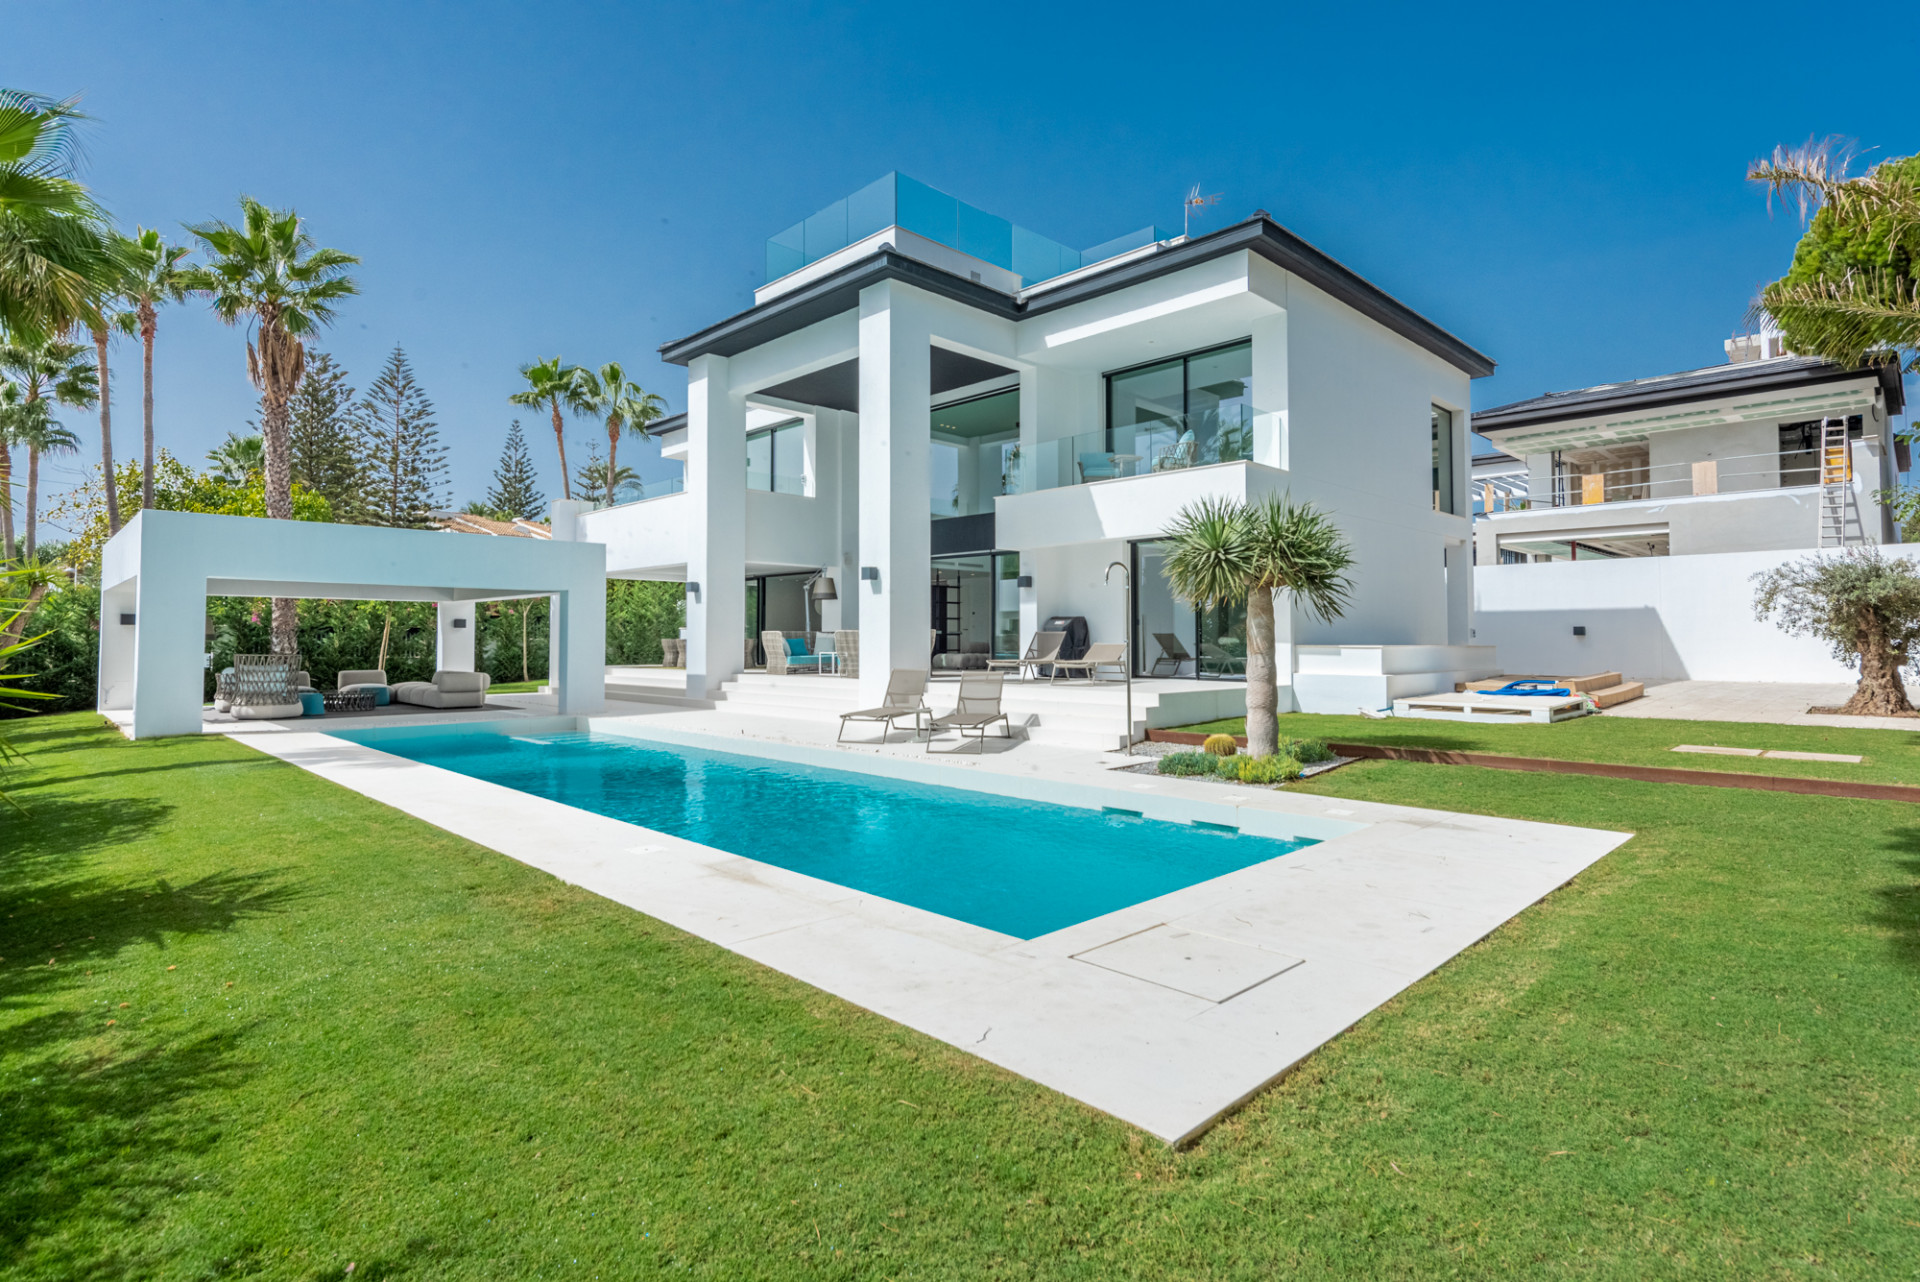 Spectacular villa situated almost front line beach in Cortijo Blanco, close to Puerto Banus.